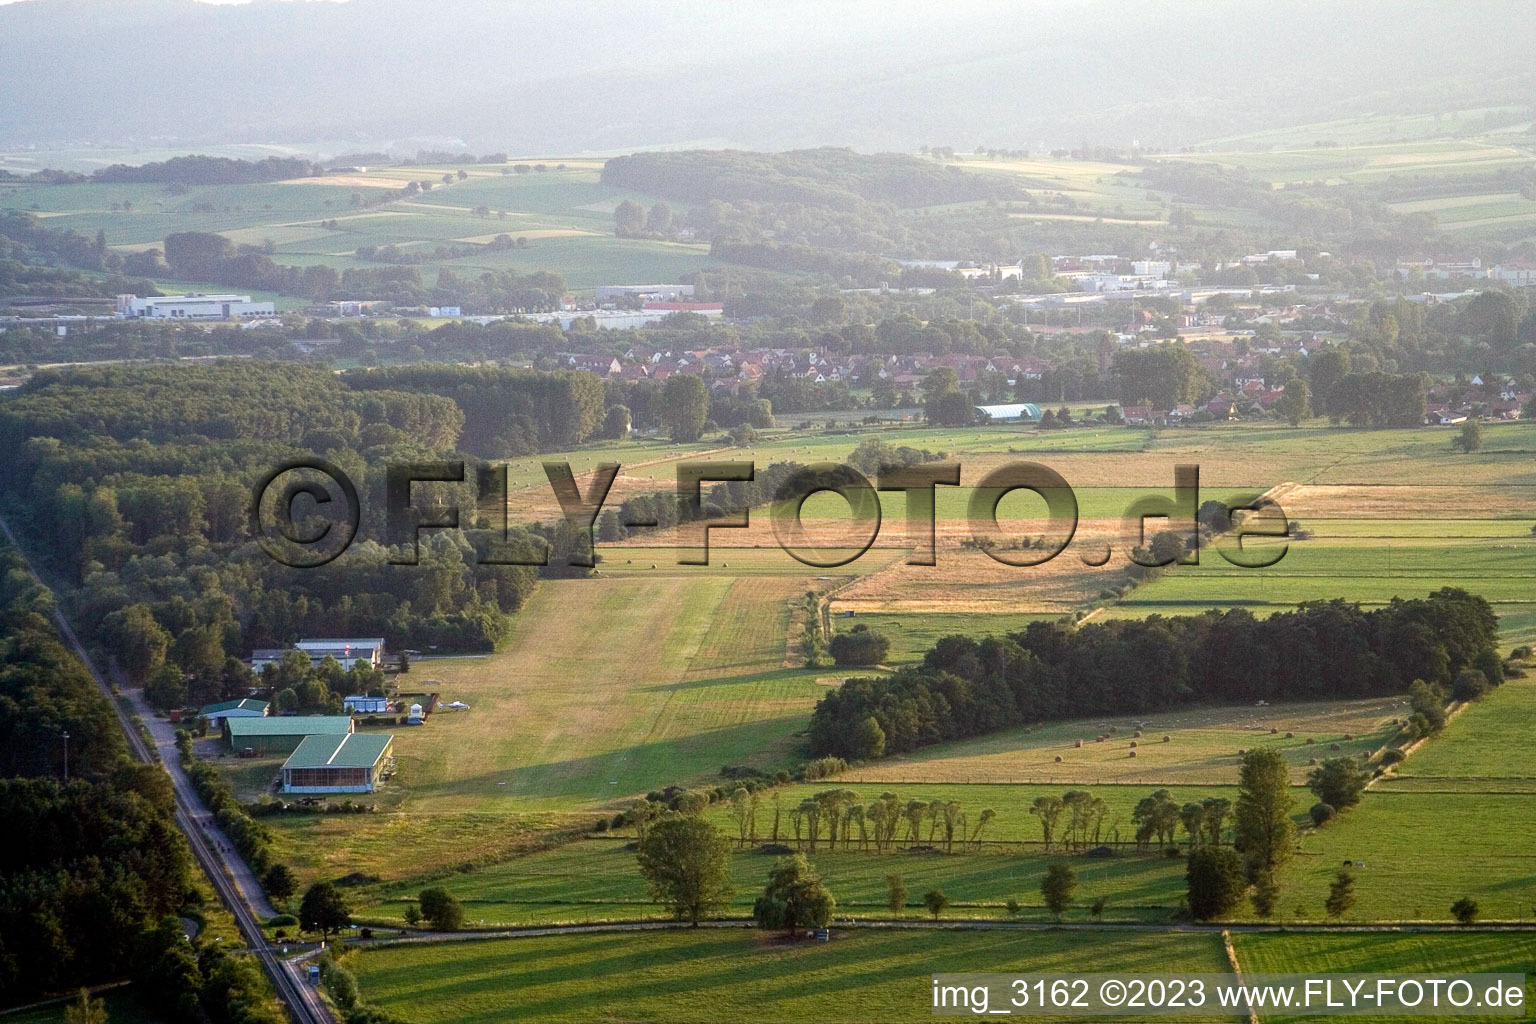 Airfield from the east in Schweighofen in the state Rhineland-Palatinate, Germany